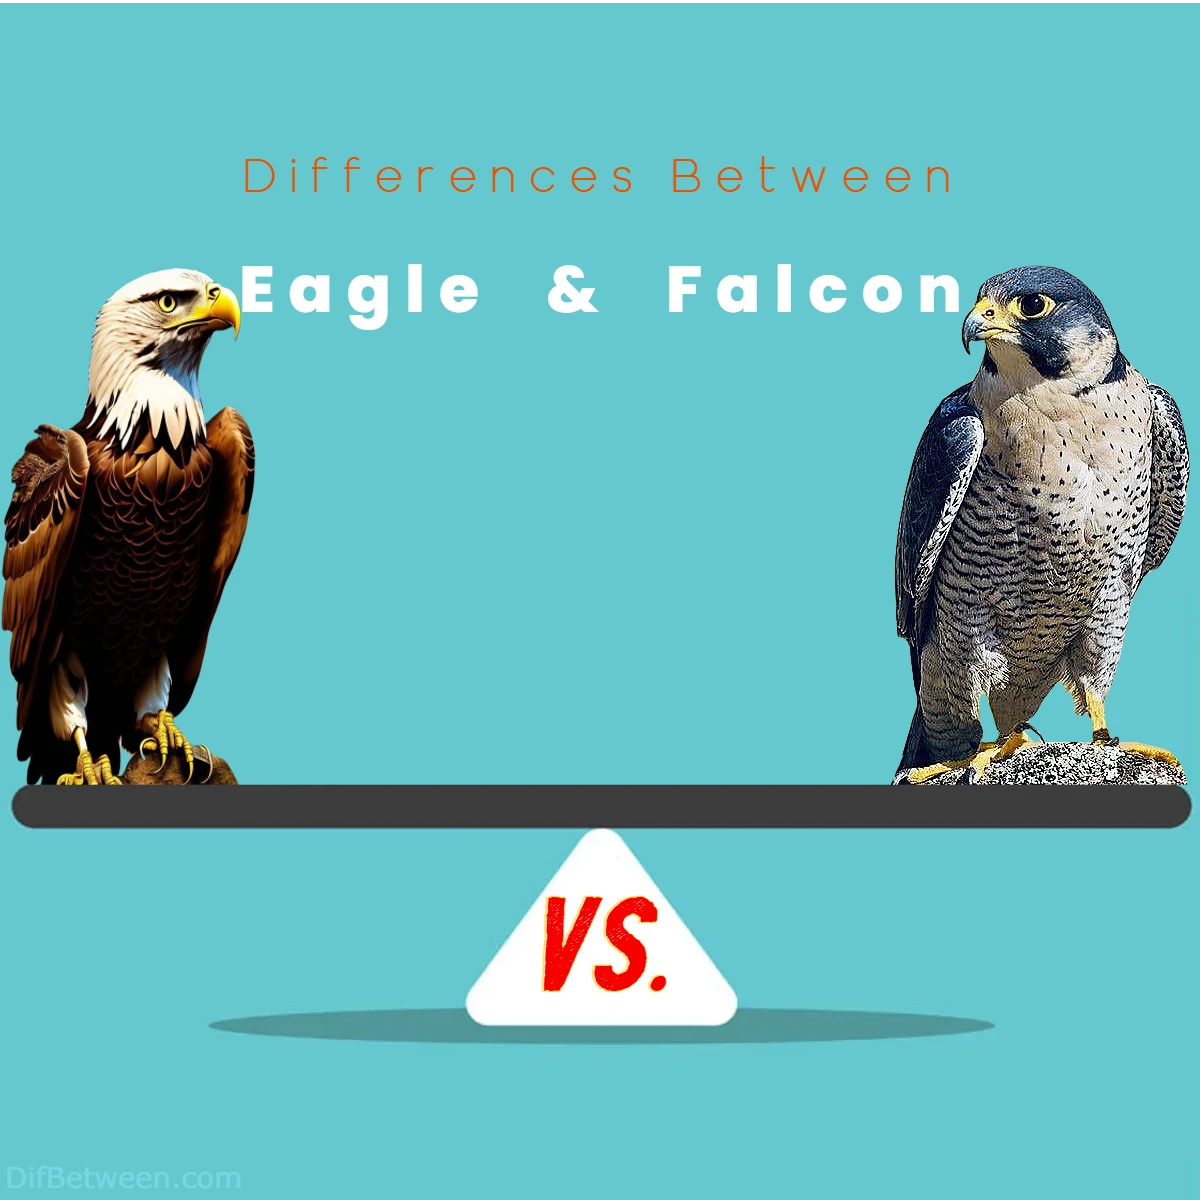 Differences Between Eagle vs Falcon